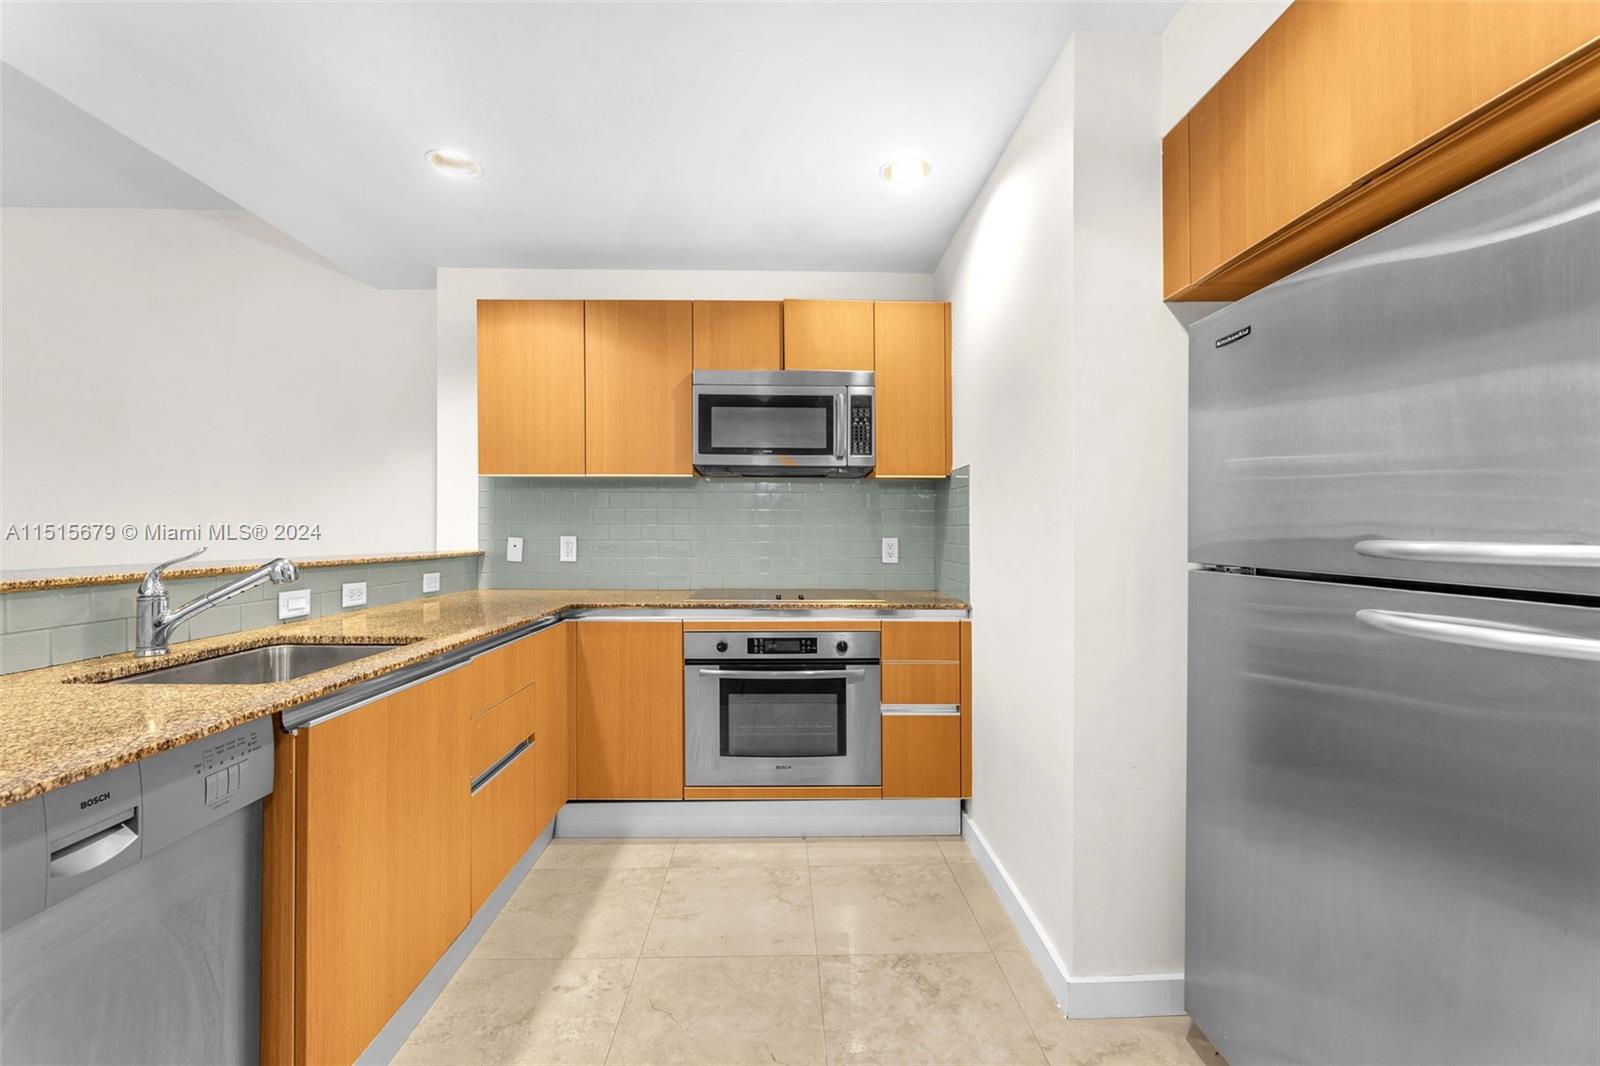 A gorgeous studio situated in the central part of Brickell. The kitchen is modern, equipped with stainless steel appliances and granite countertops. The unit features floor-to-ceiling impact balcony doors, wood floors, and an in-unit washer and dryer. The rental includes a basic cable plan and water service. The outdoor spaces are stunning, offering panoramic views, along with amenities like a fitness center, swimming pool, sundeck, yoga/aerobics room, spa treatment room, game room, billiards table, and 24/7 concierge, valet, and security services. The location of 1050 Brickell is convenient, close to Mary Brickell Village, Brickell City Center, the metro, and more. Please be aware that rental requires the first month's rent plus two security deposits.